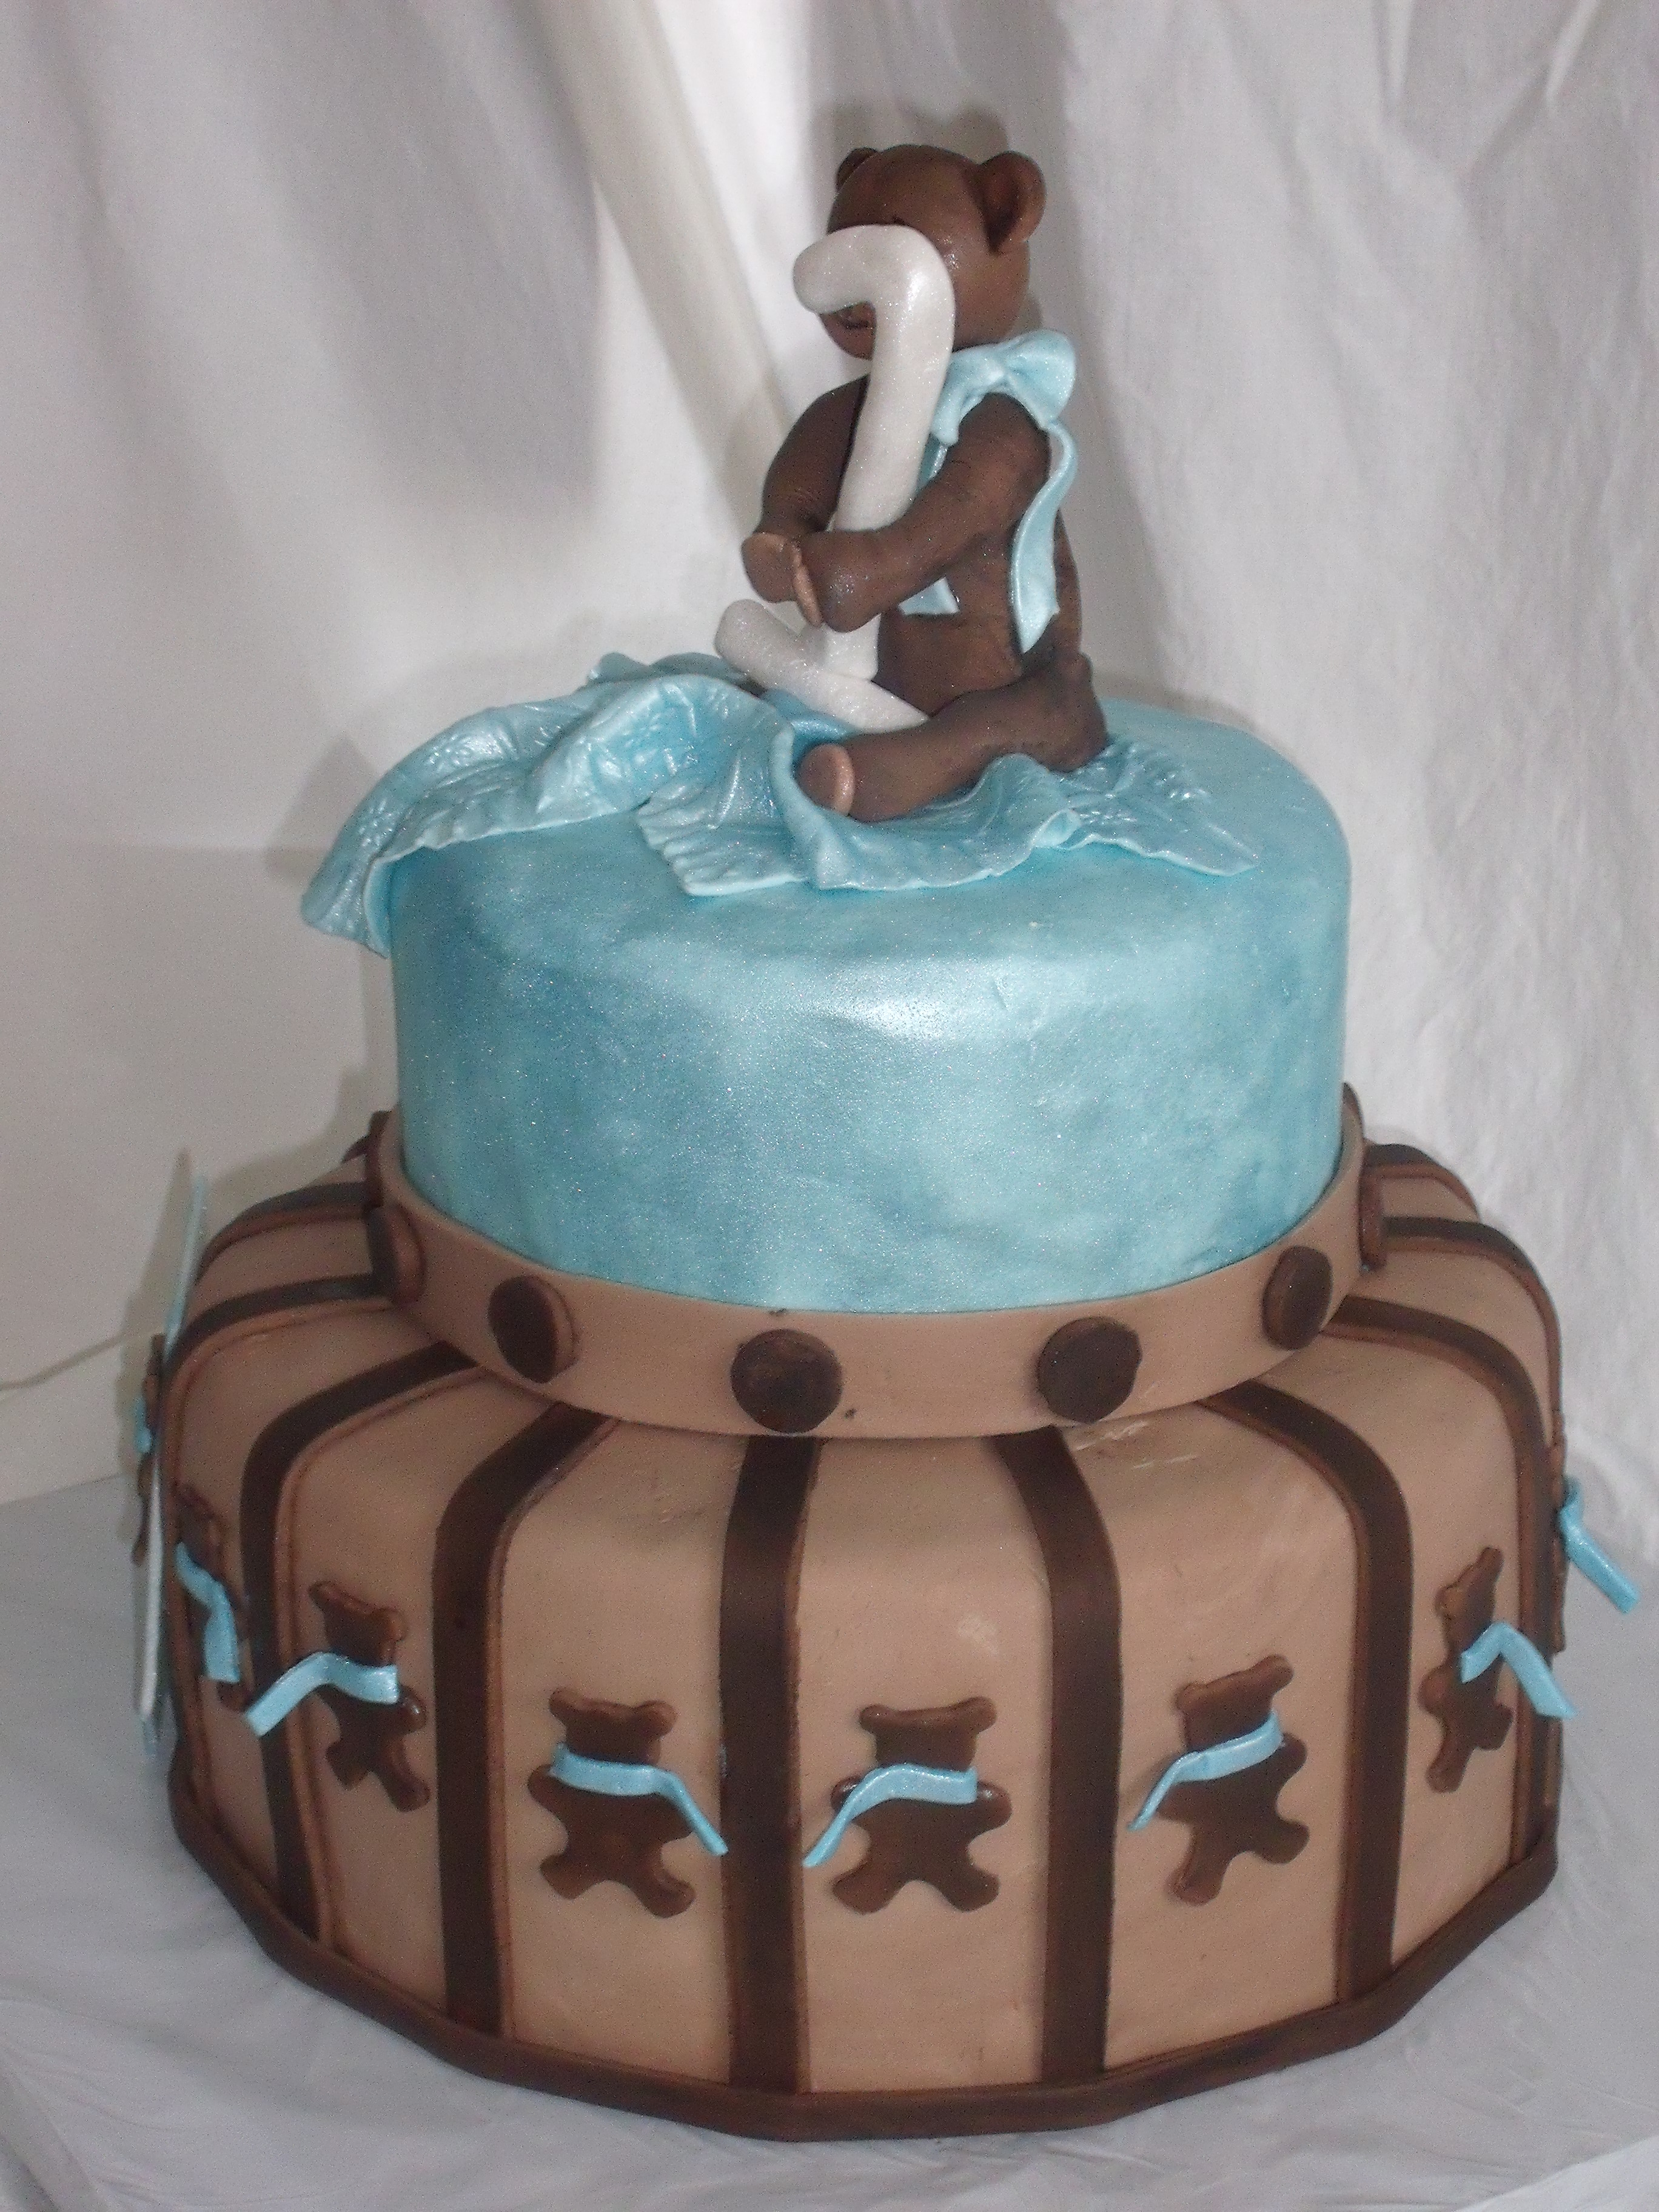 Blue And Brown Teddy Bear Themed Baby Shower Cake Designed By Kate